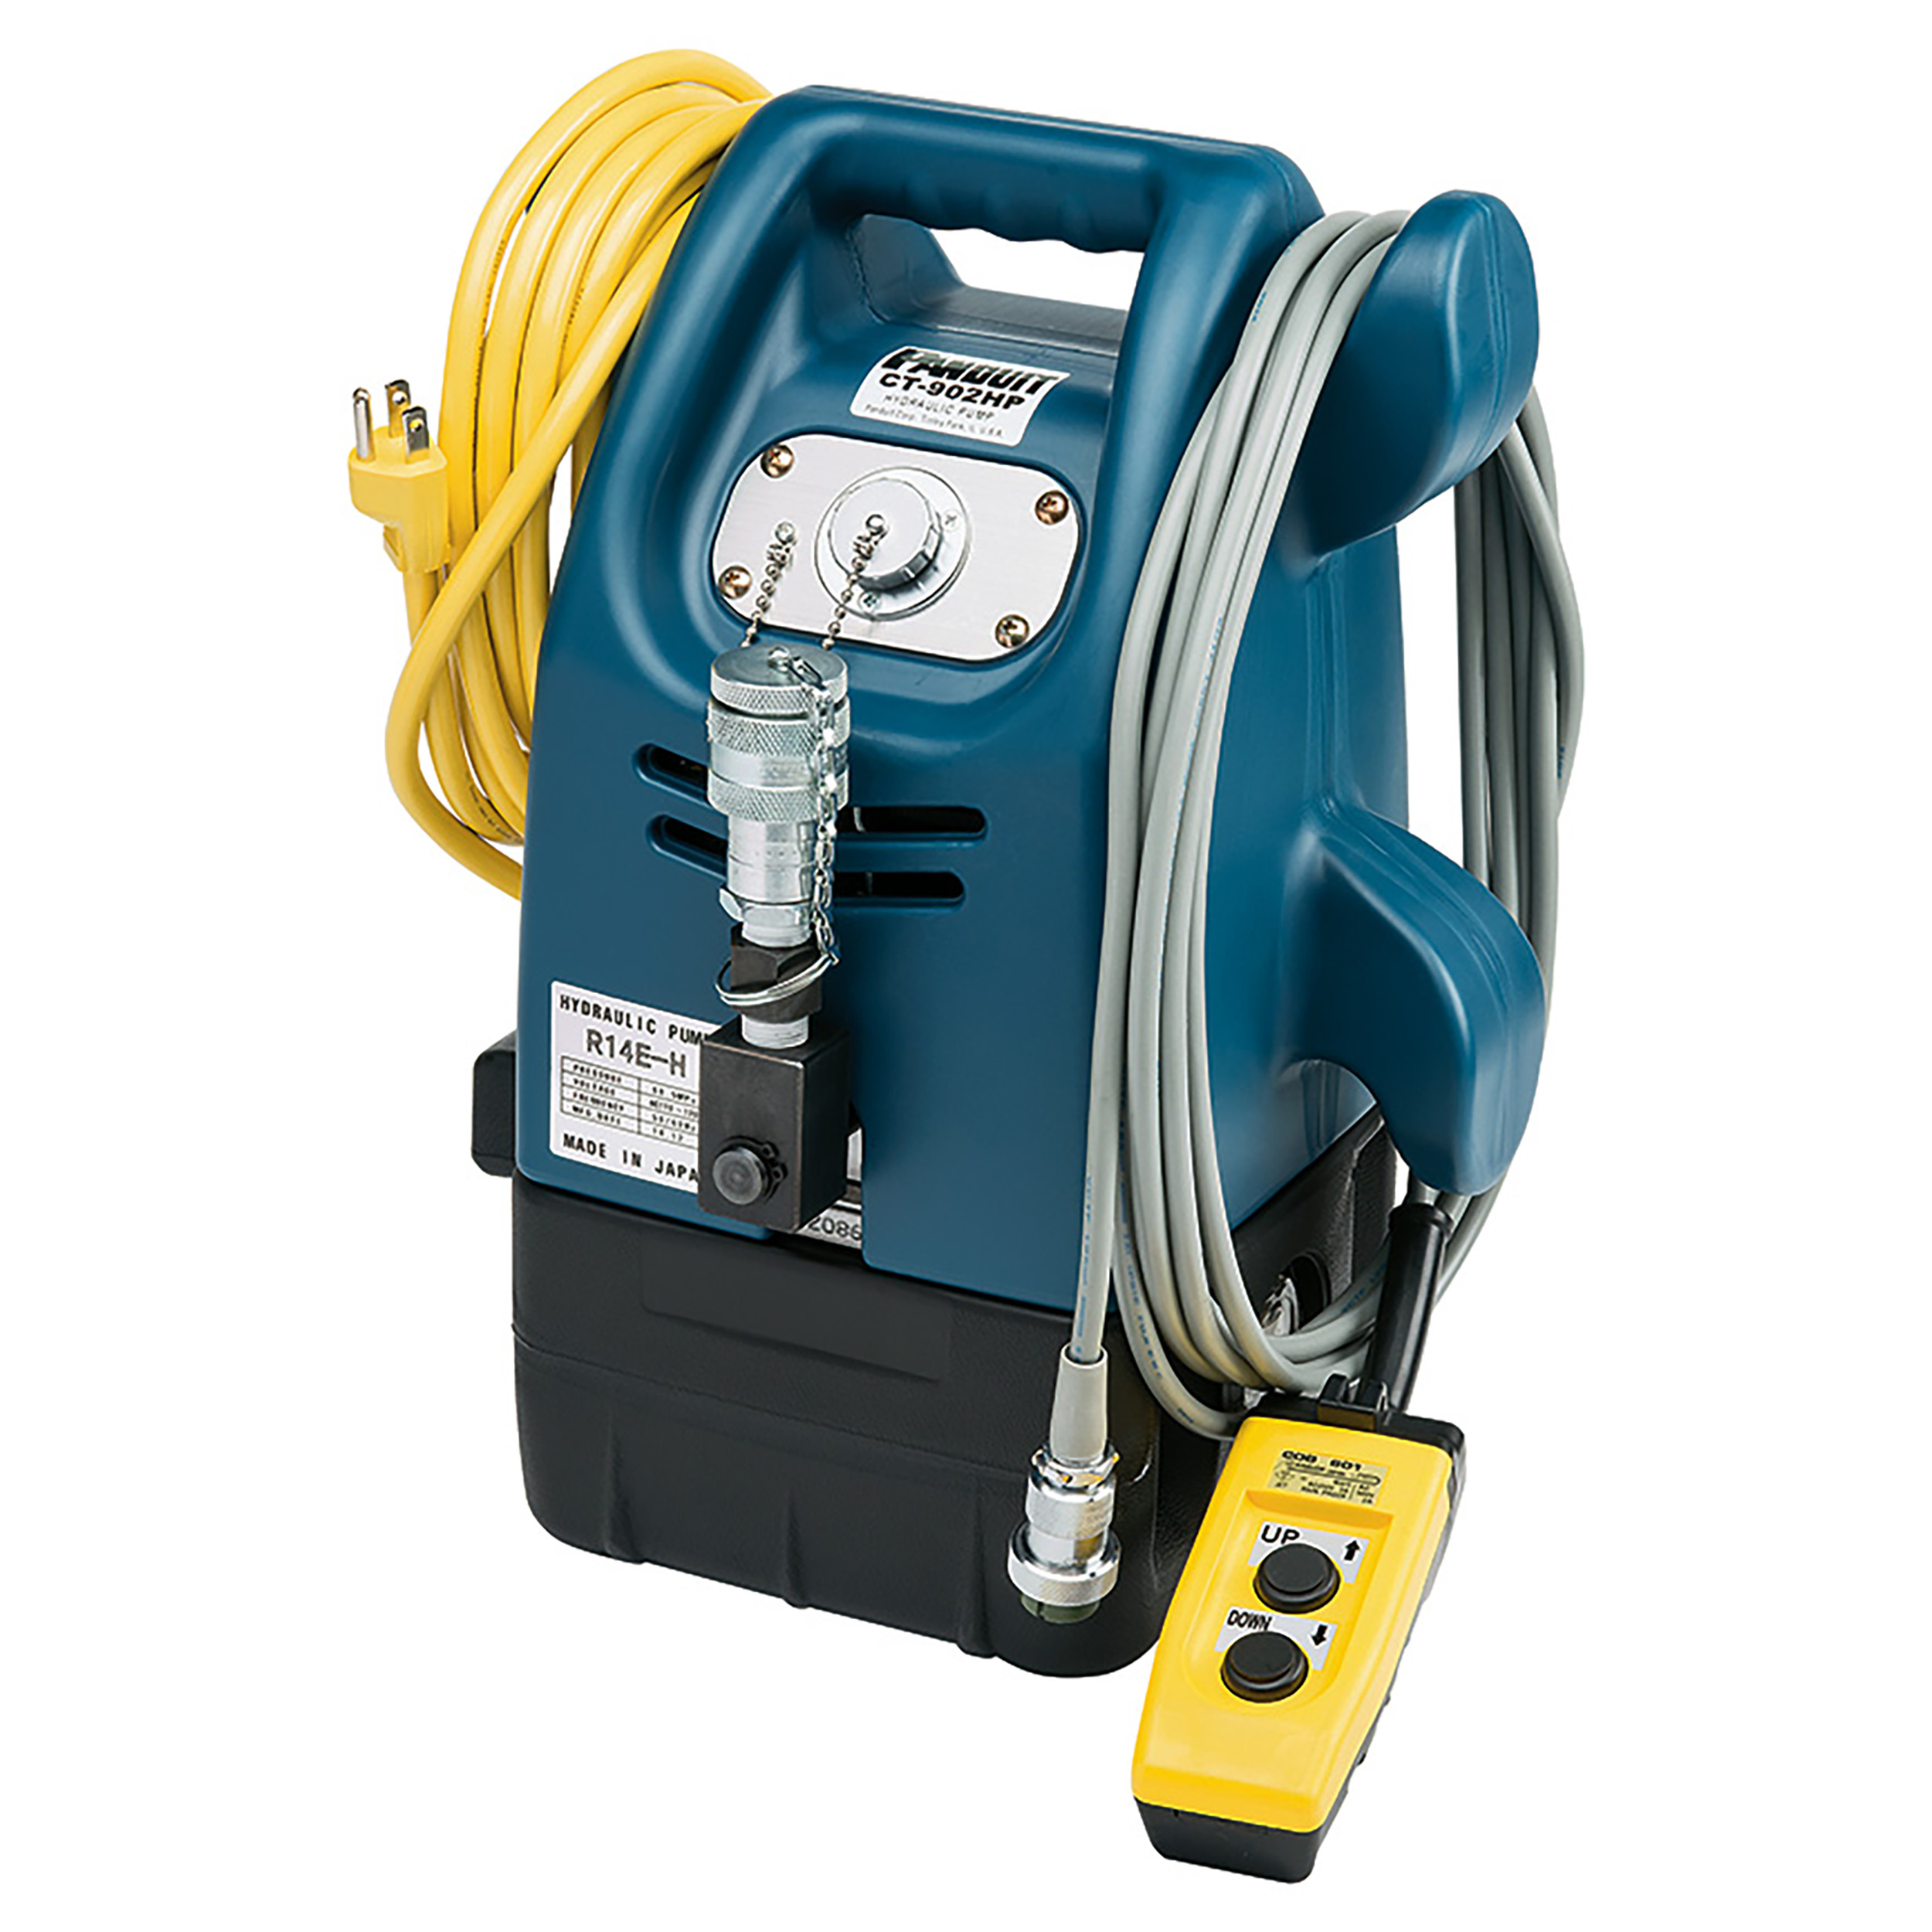 110 V Hydraulic Pump with Foot Switch, 10K PSI